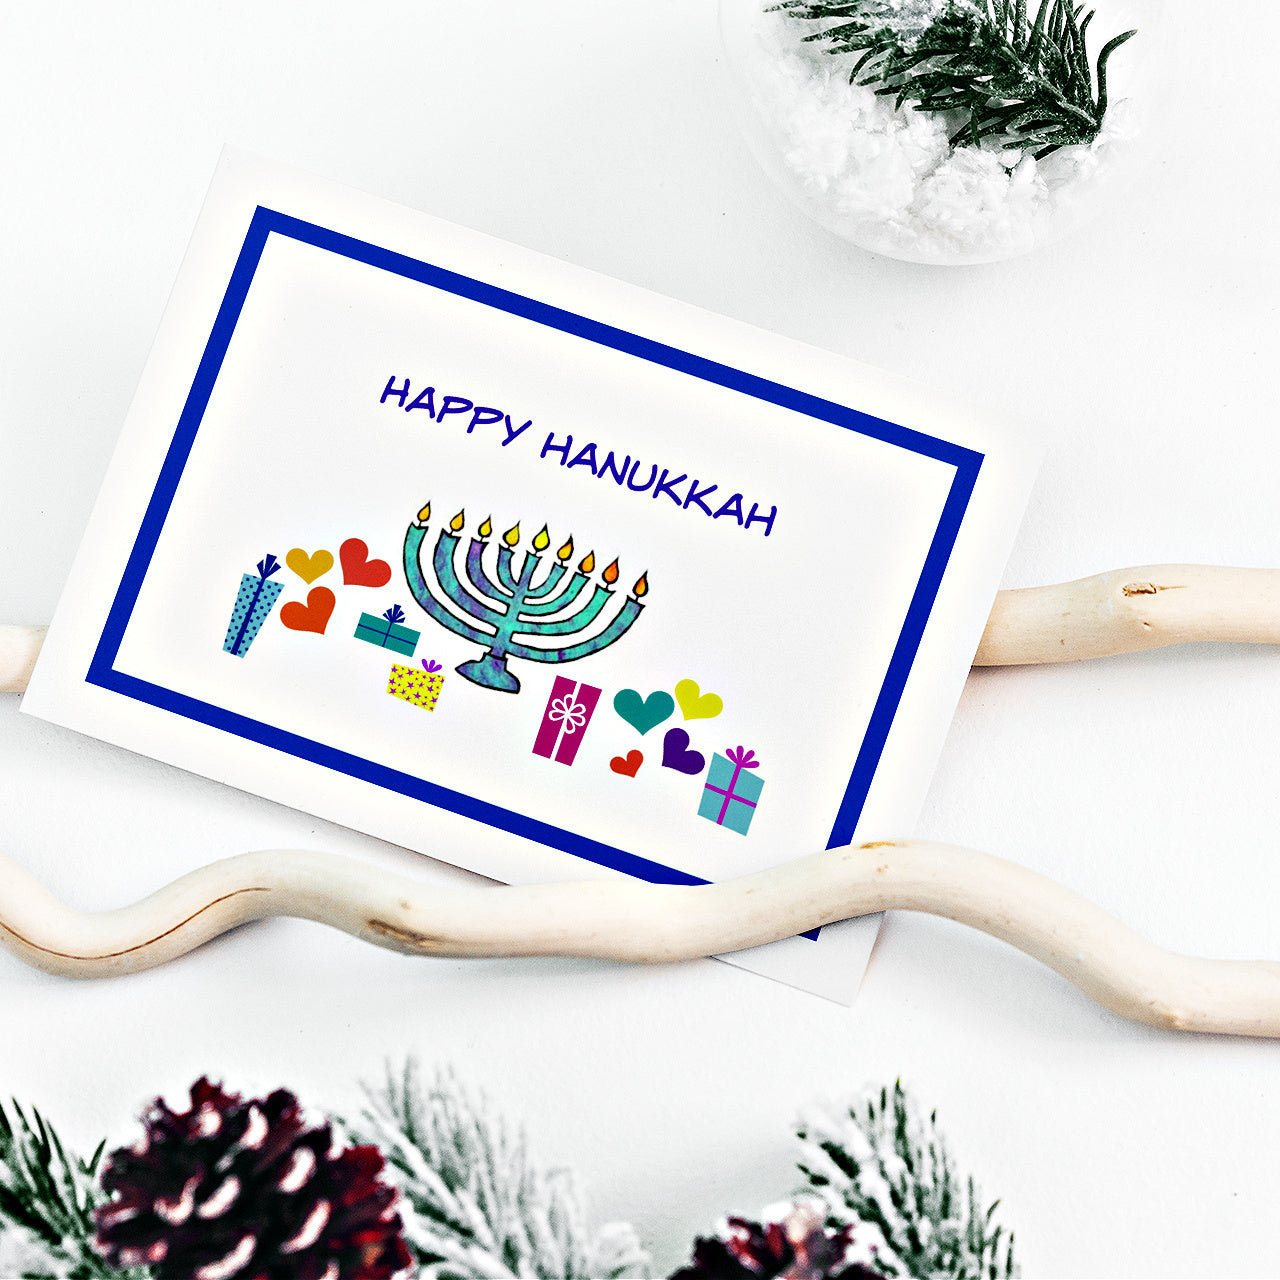 Mock up of the Hanukkah card on a winter background